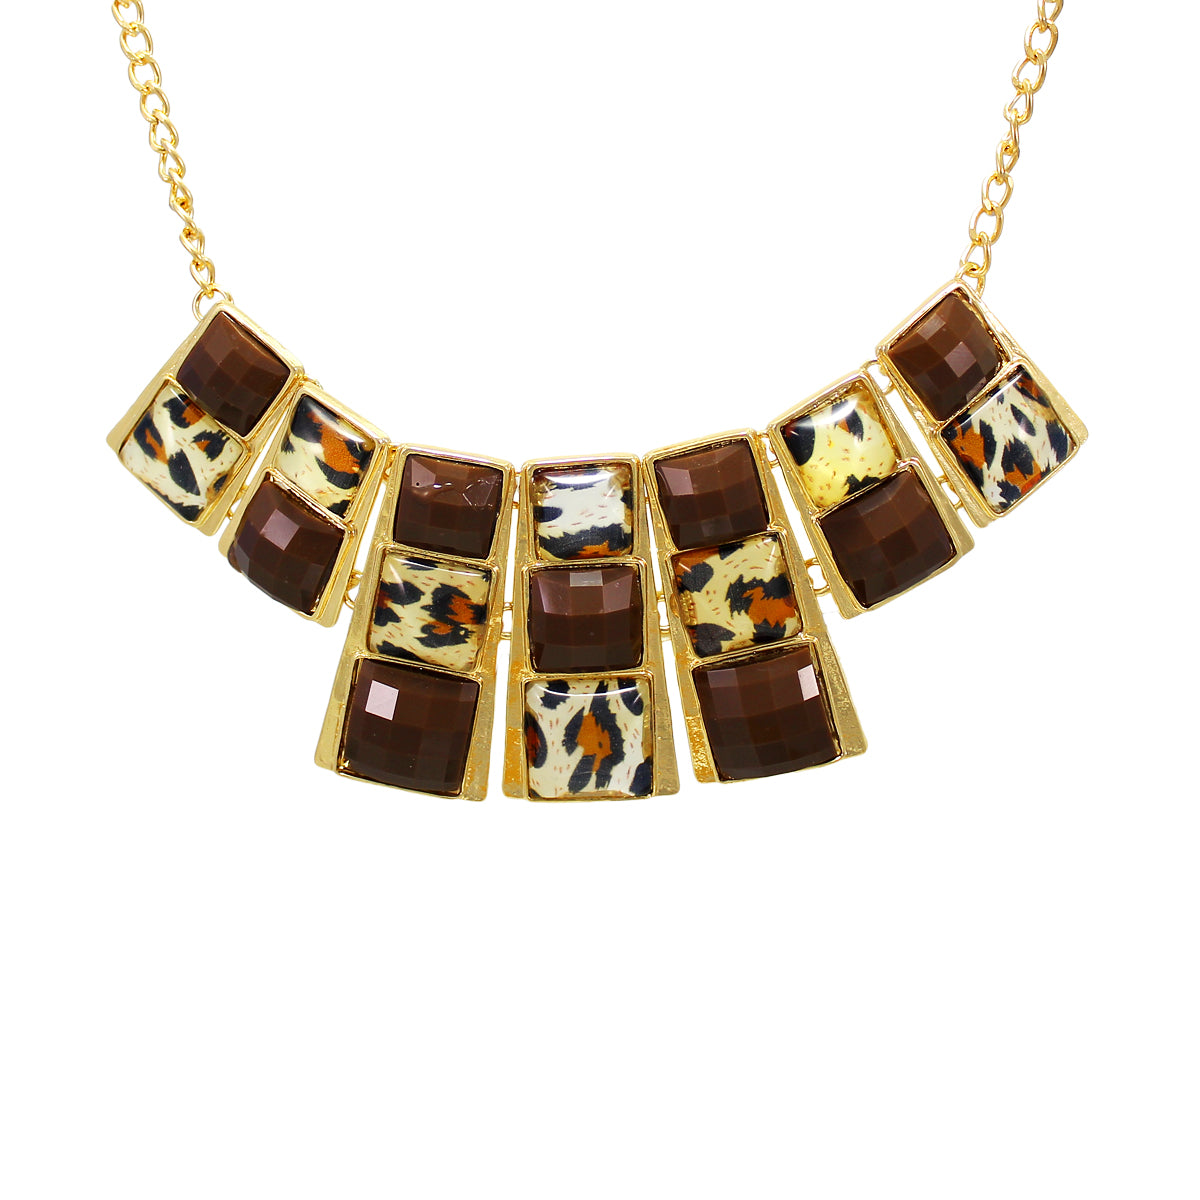 Abhinn Stylish Designer Golden Necklace with Brown Square Animal Print Stones For Women